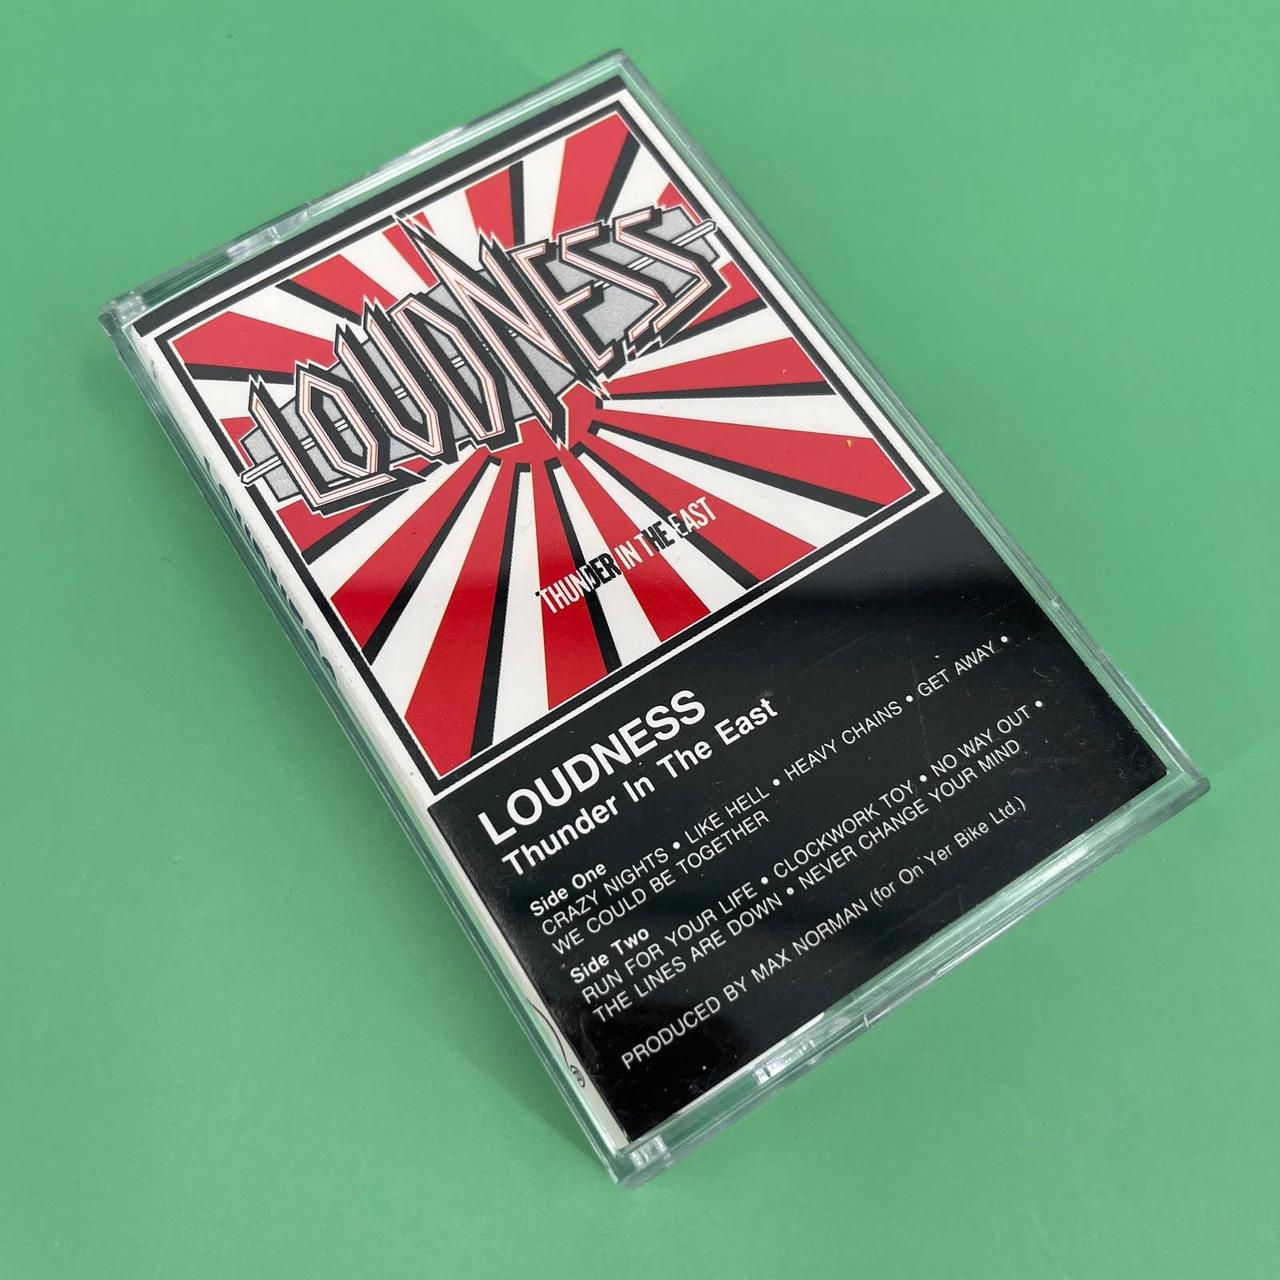 Loudness - Thunder in the East cassette tape ATCO 7... - Depop